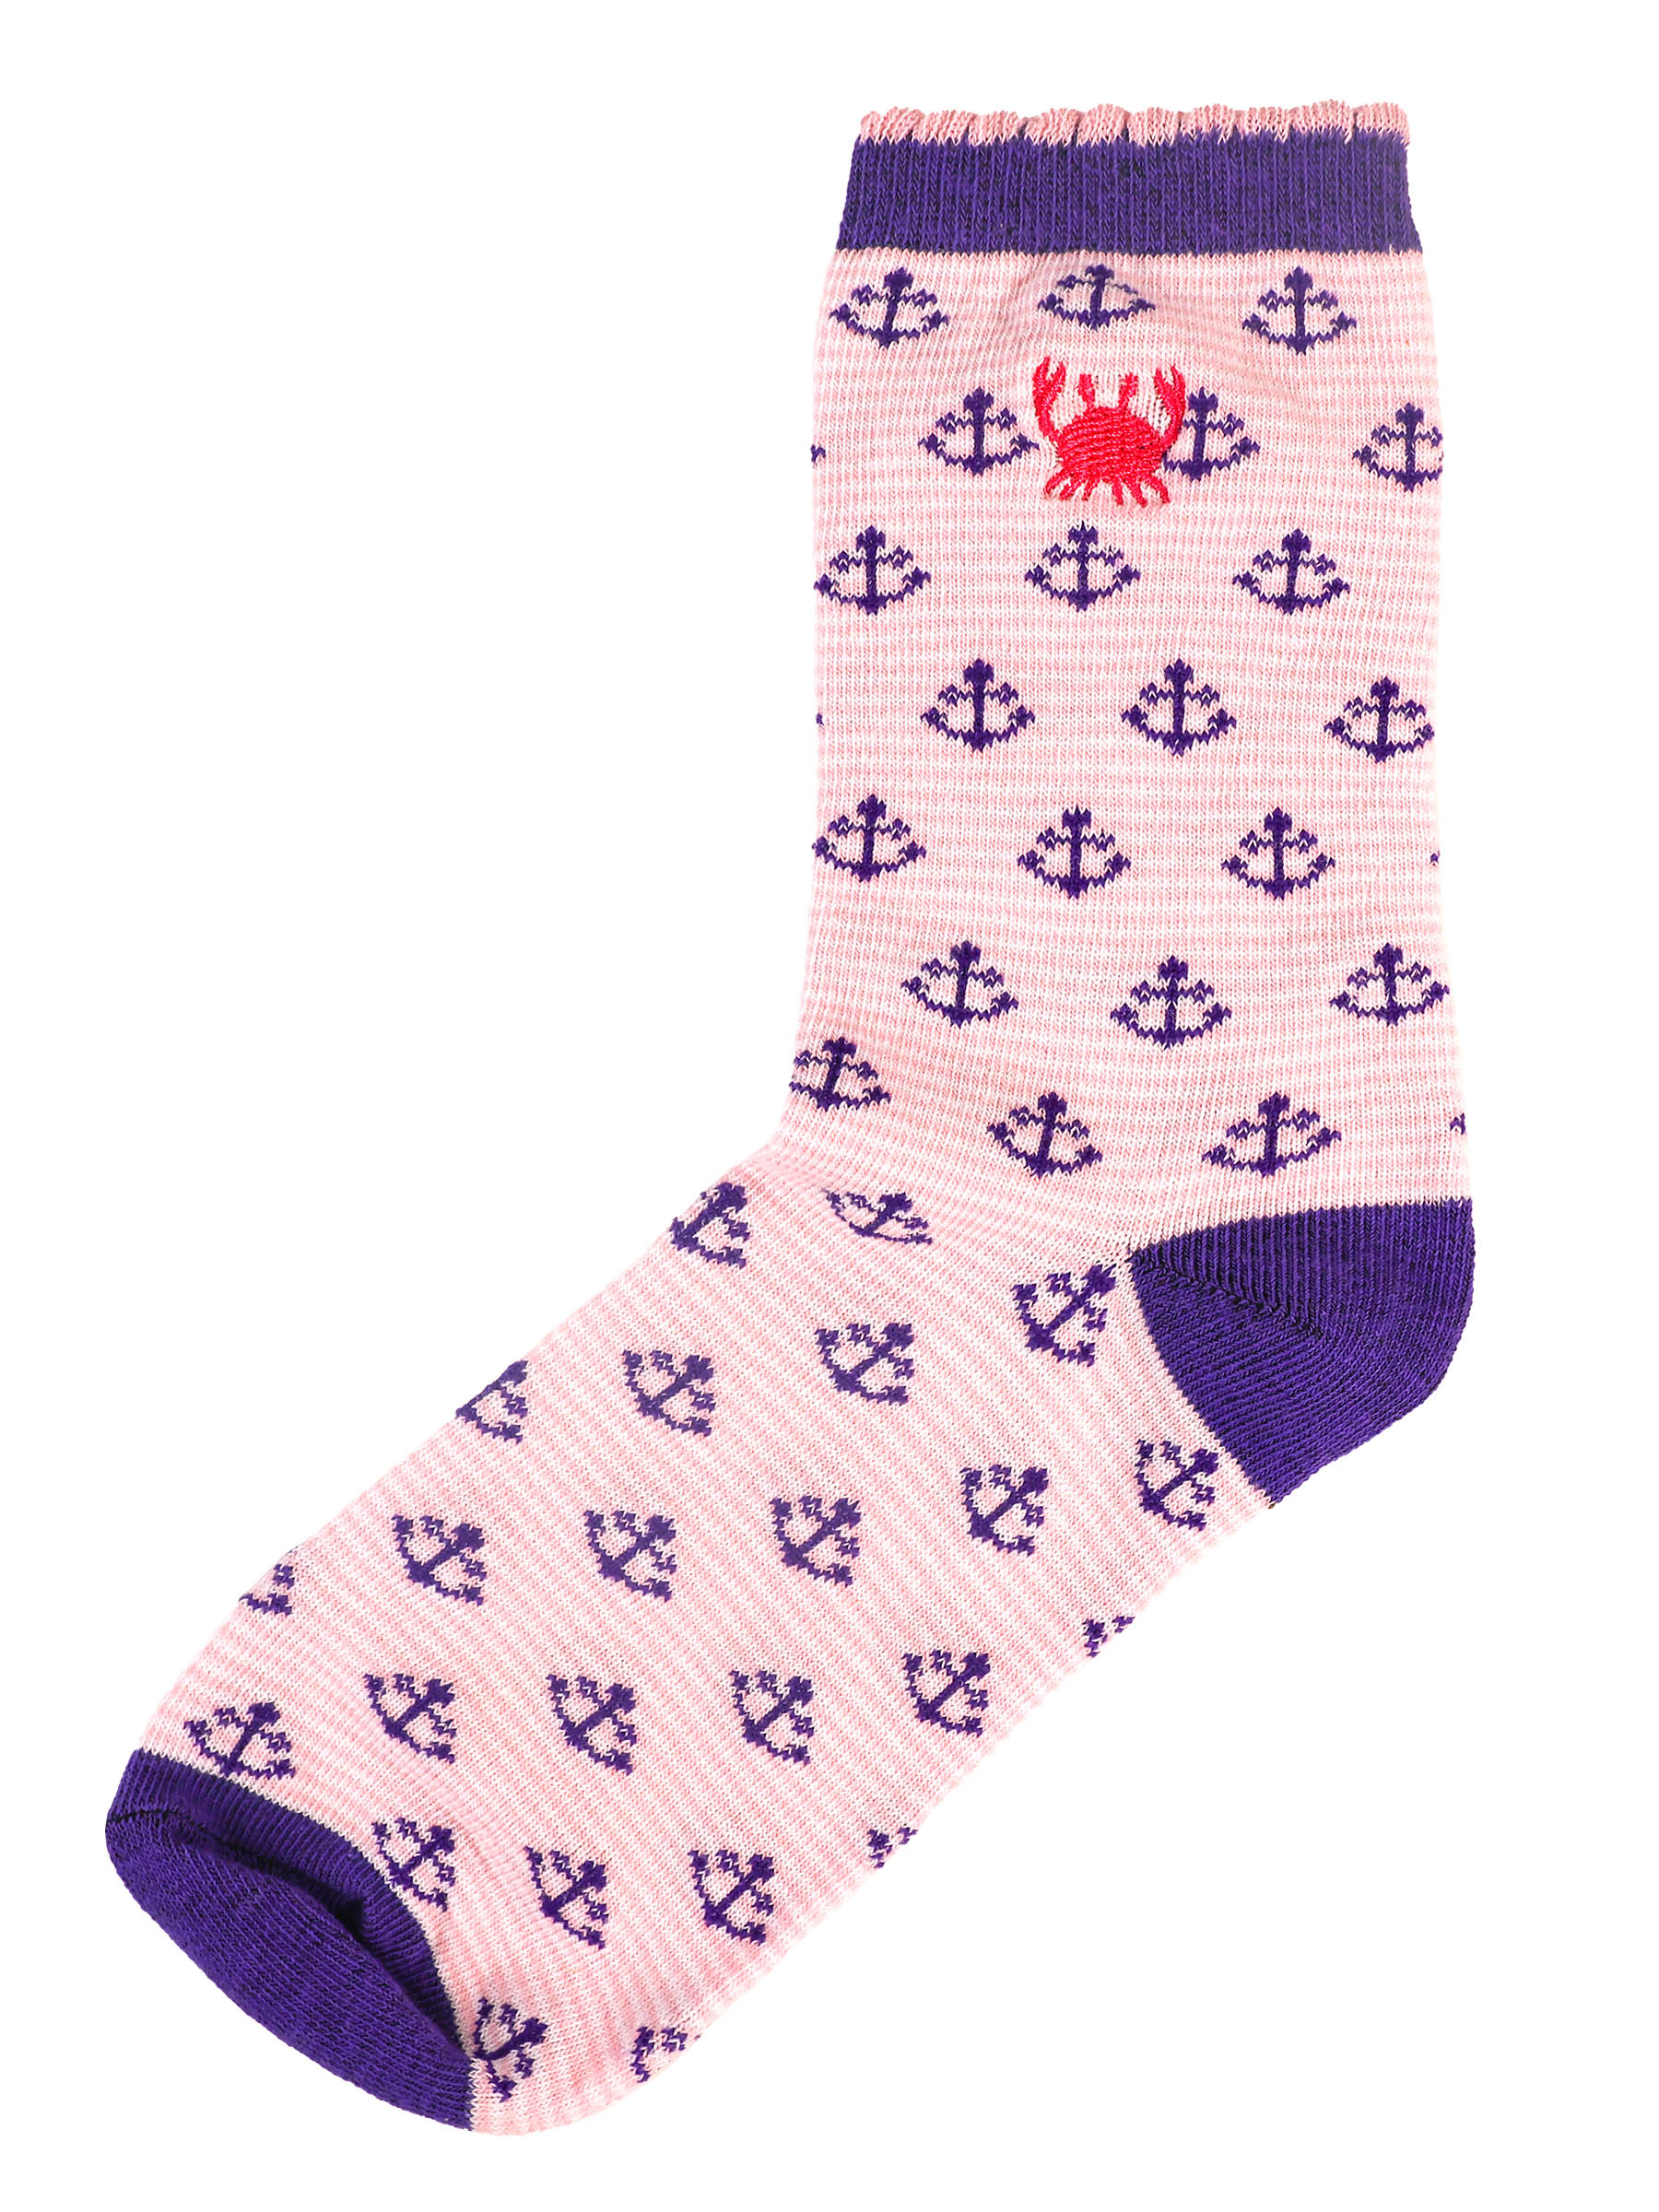 Socks by Simply Southern